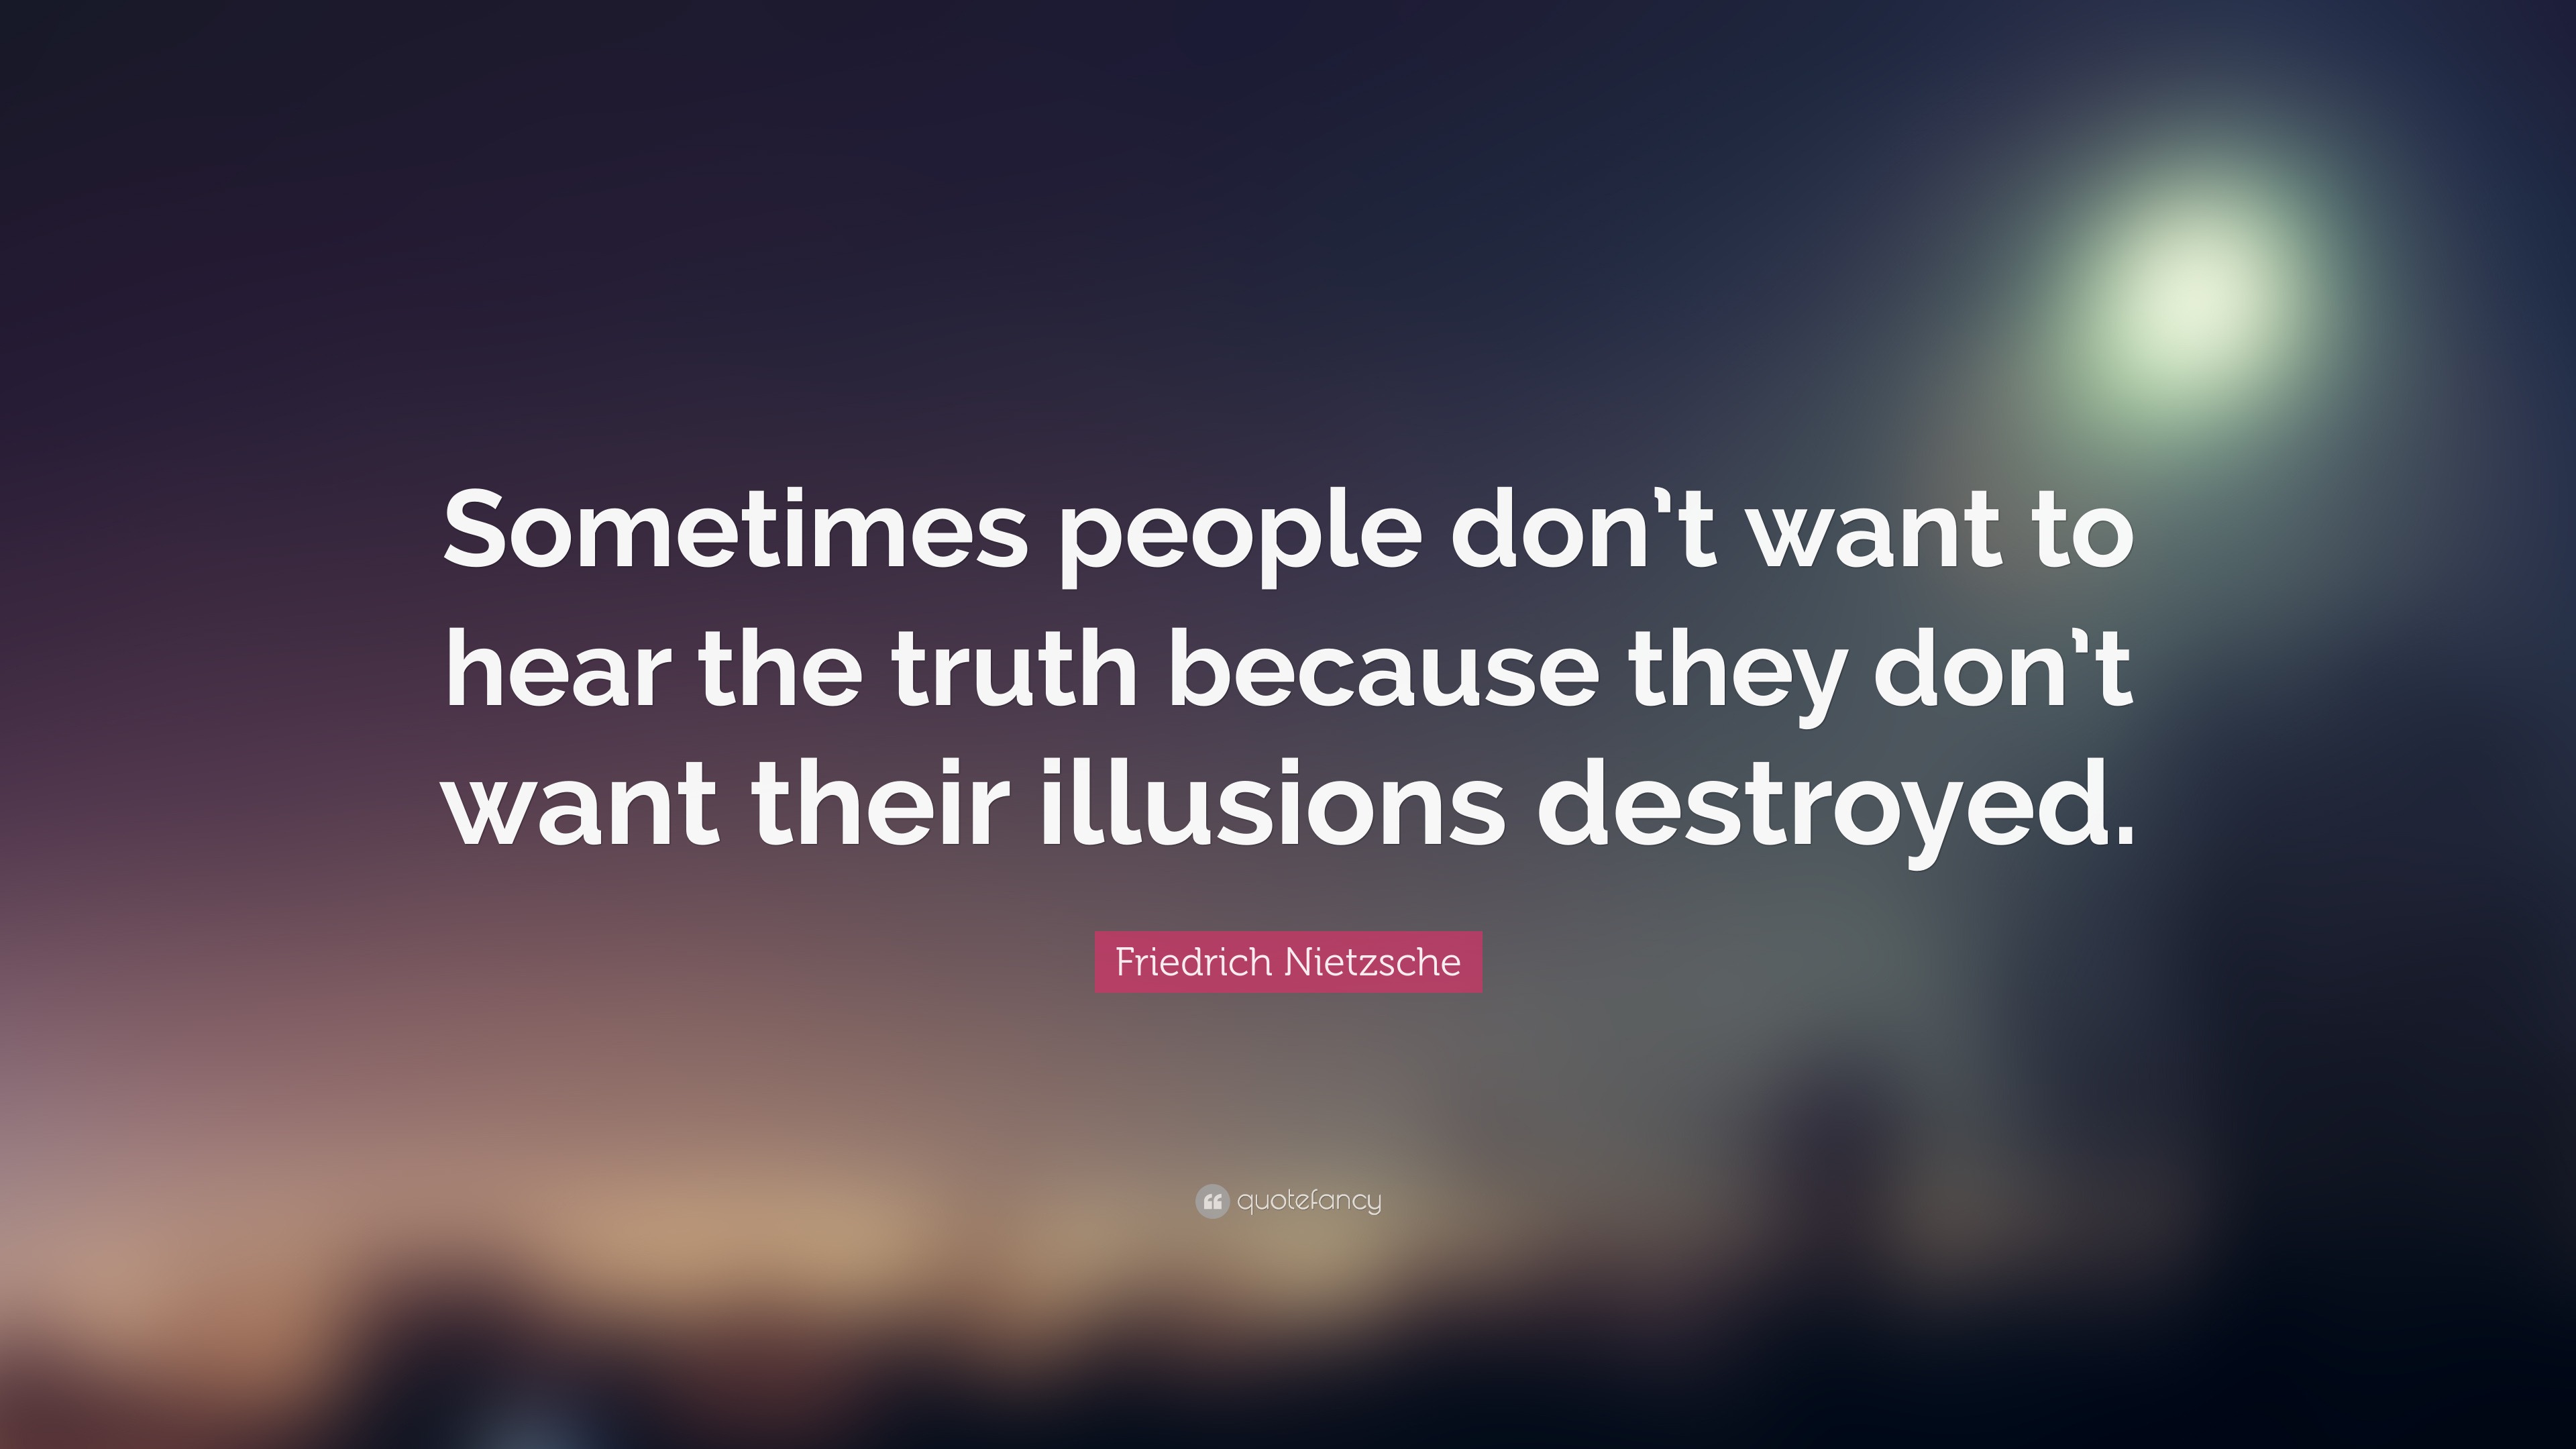 Friedrich Nietzsche Quote: “Sometimes people don’t want to hear the ...